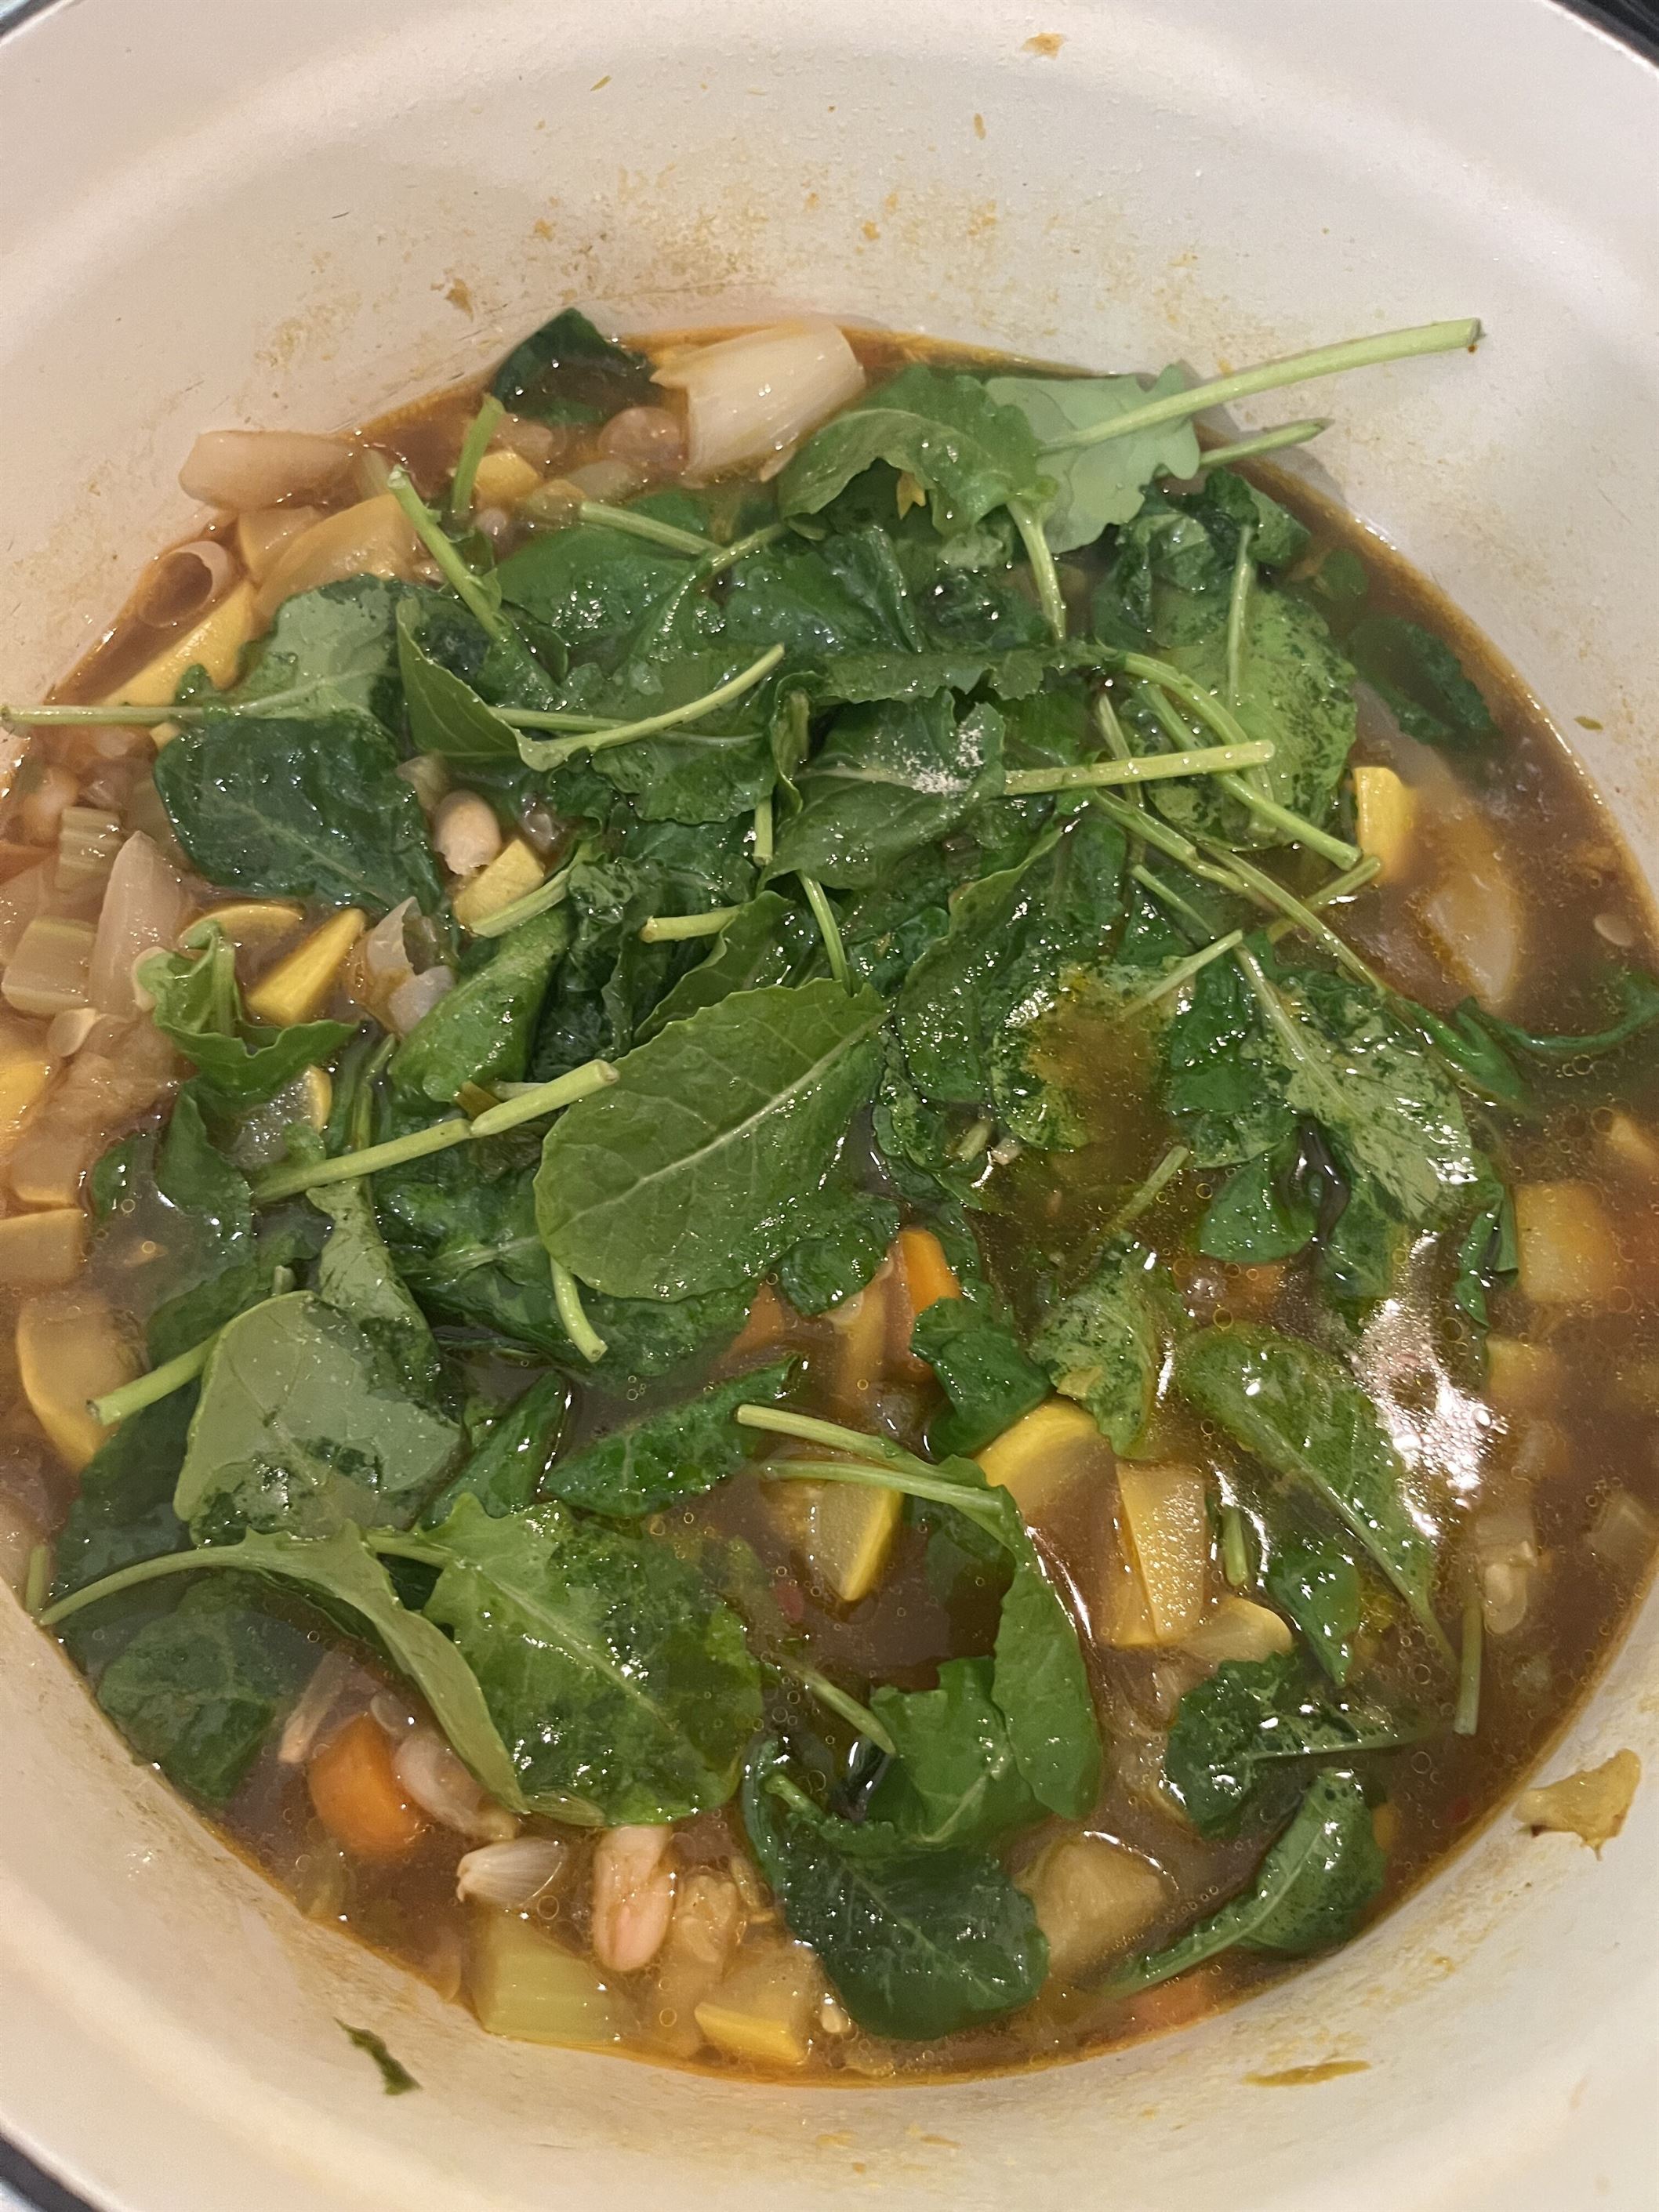 Add kale, stir, simmer with the lid on for 5-10 minutes.
Courtney Lockwood | The Montclarion